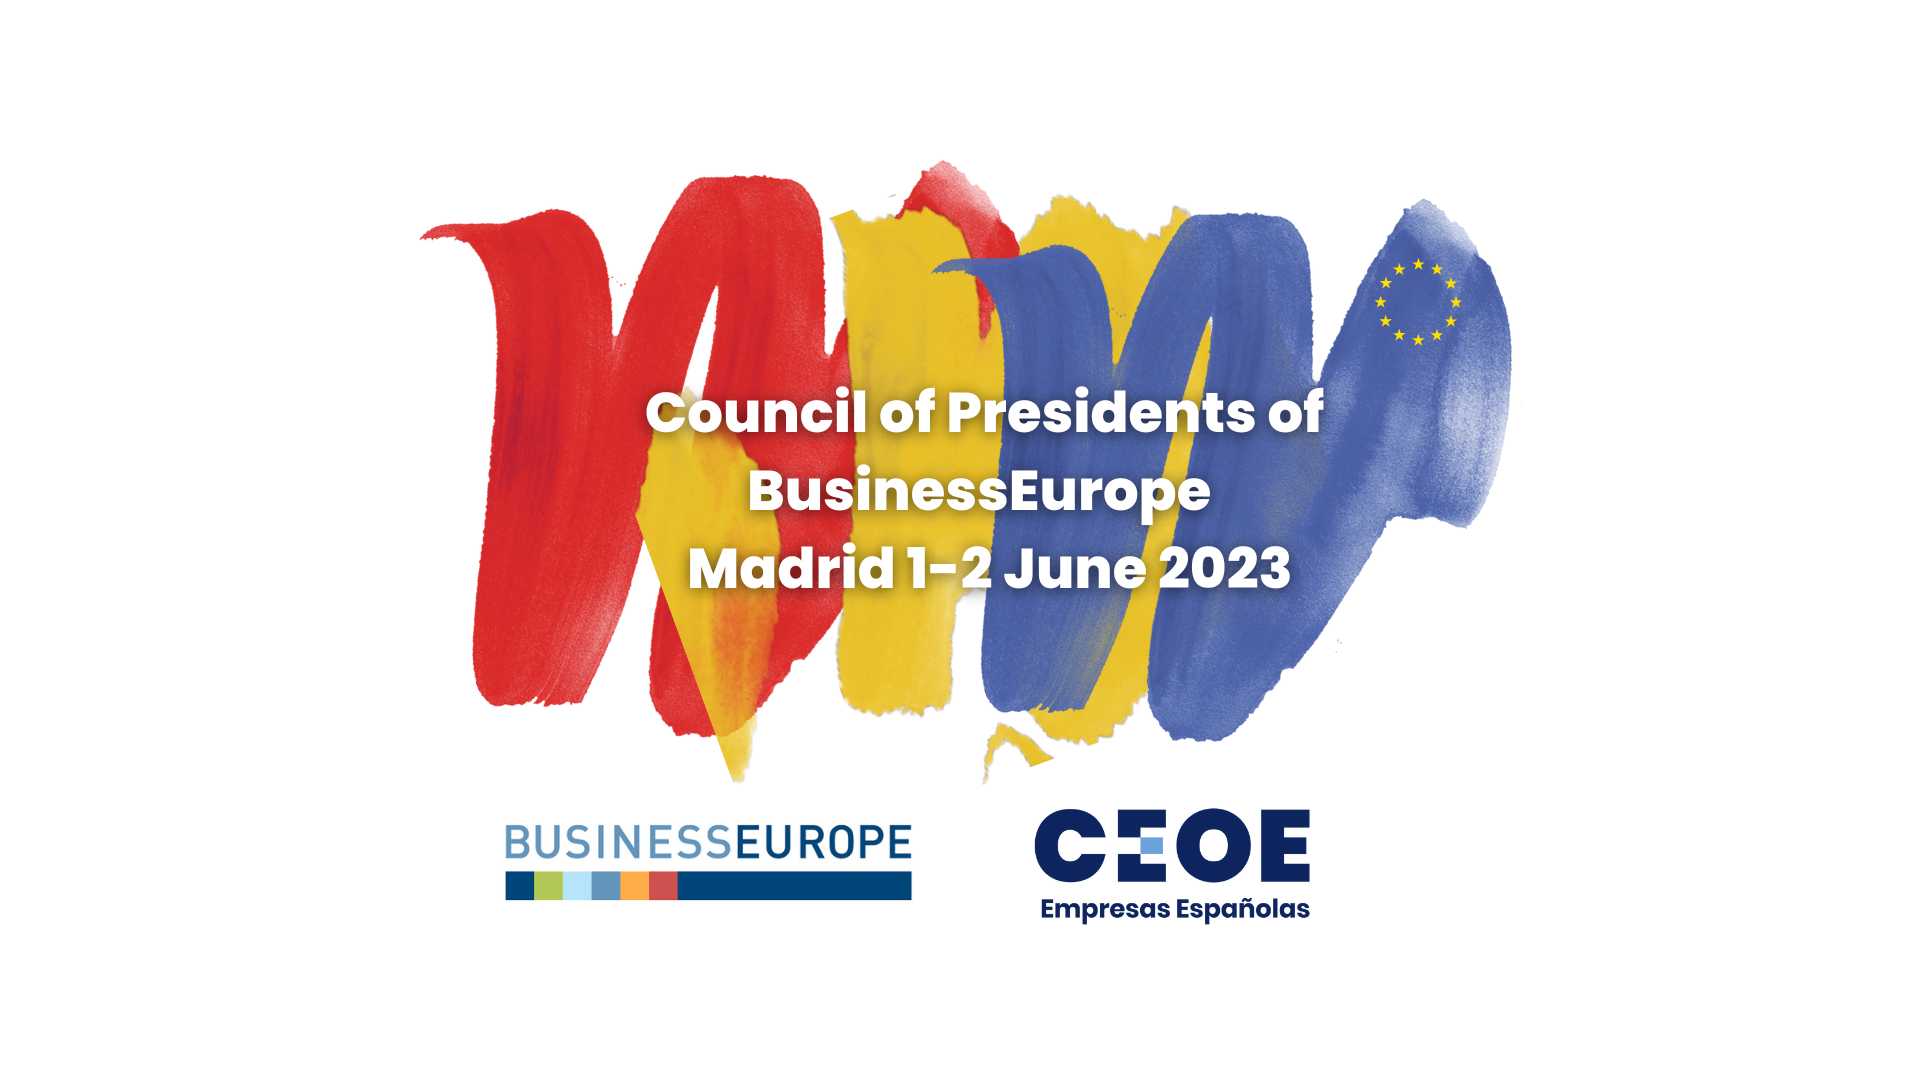 BUSINESSEUROPE Council of Presidents